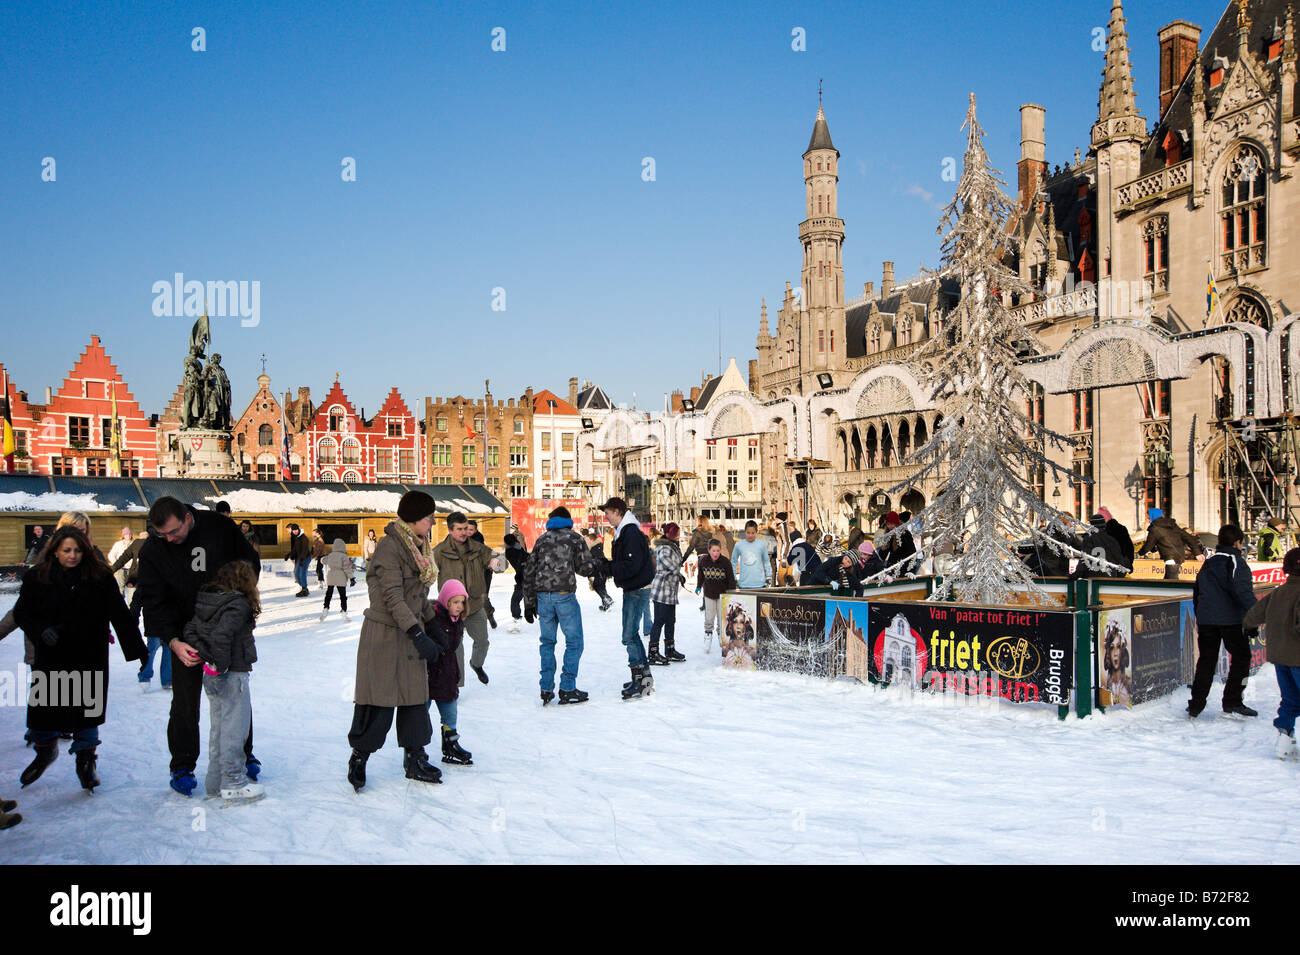 Skating Rink at the Christmas Market in the Grote Markt (Main Square), Bruges, Belgium Stock Photo